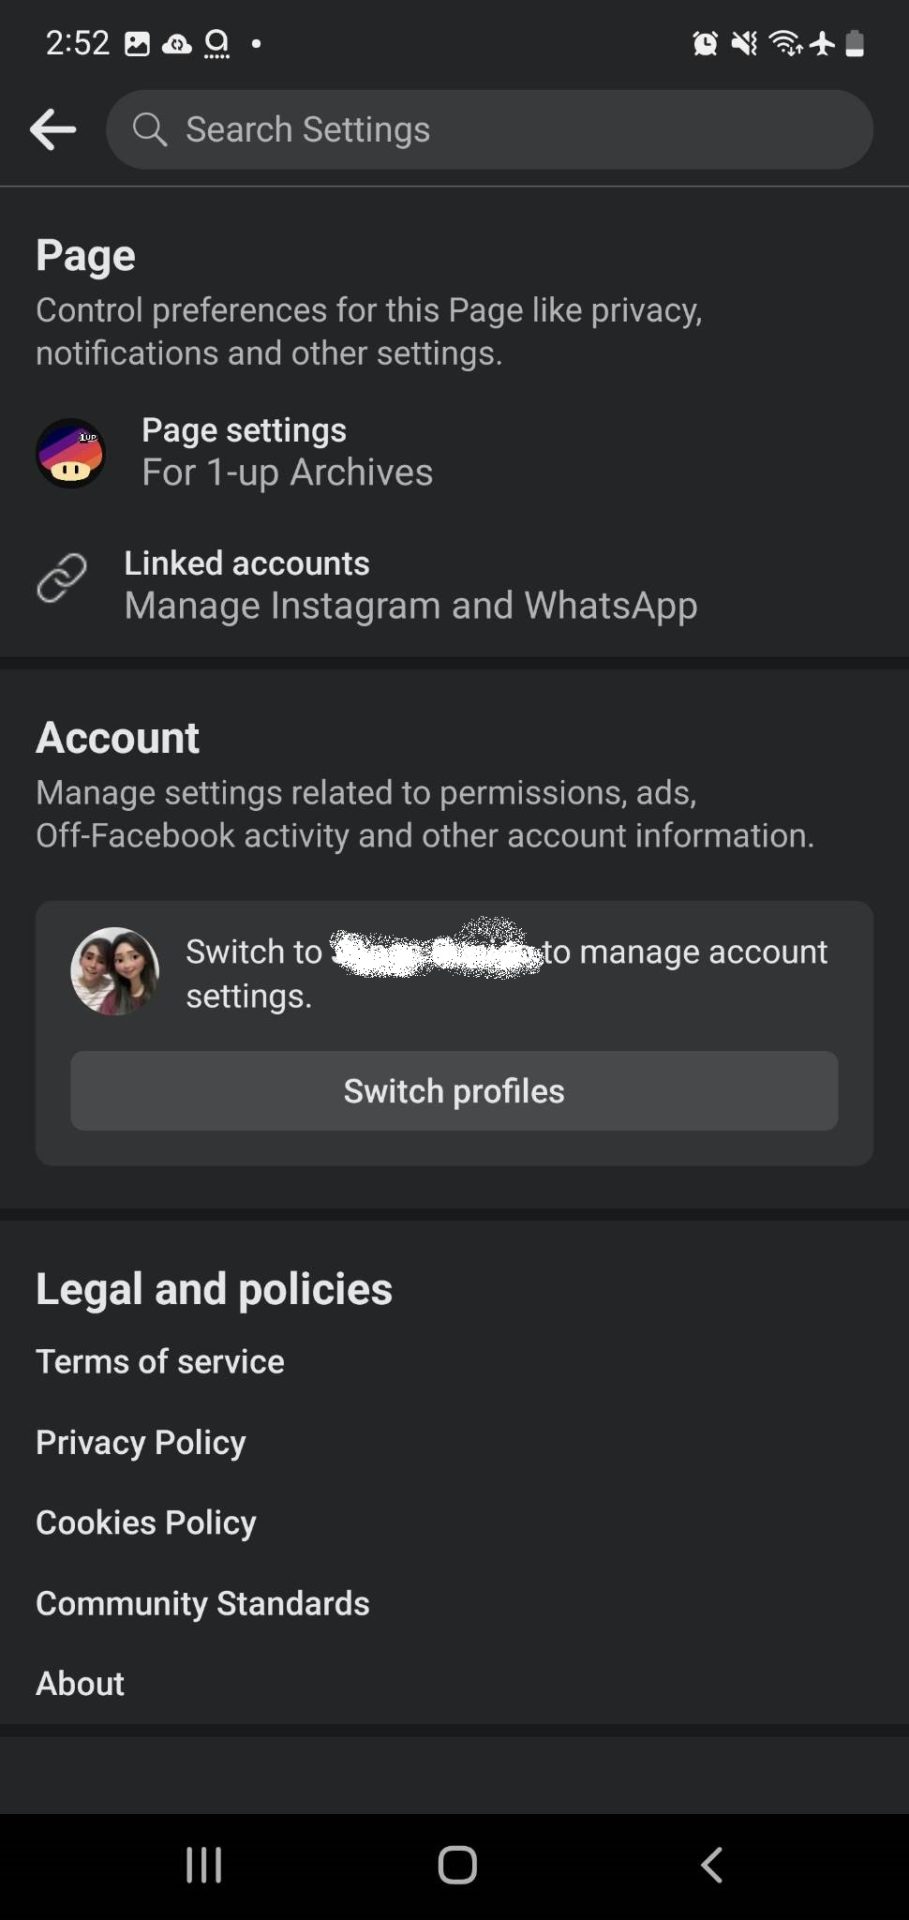 Selecting Instagram for account link